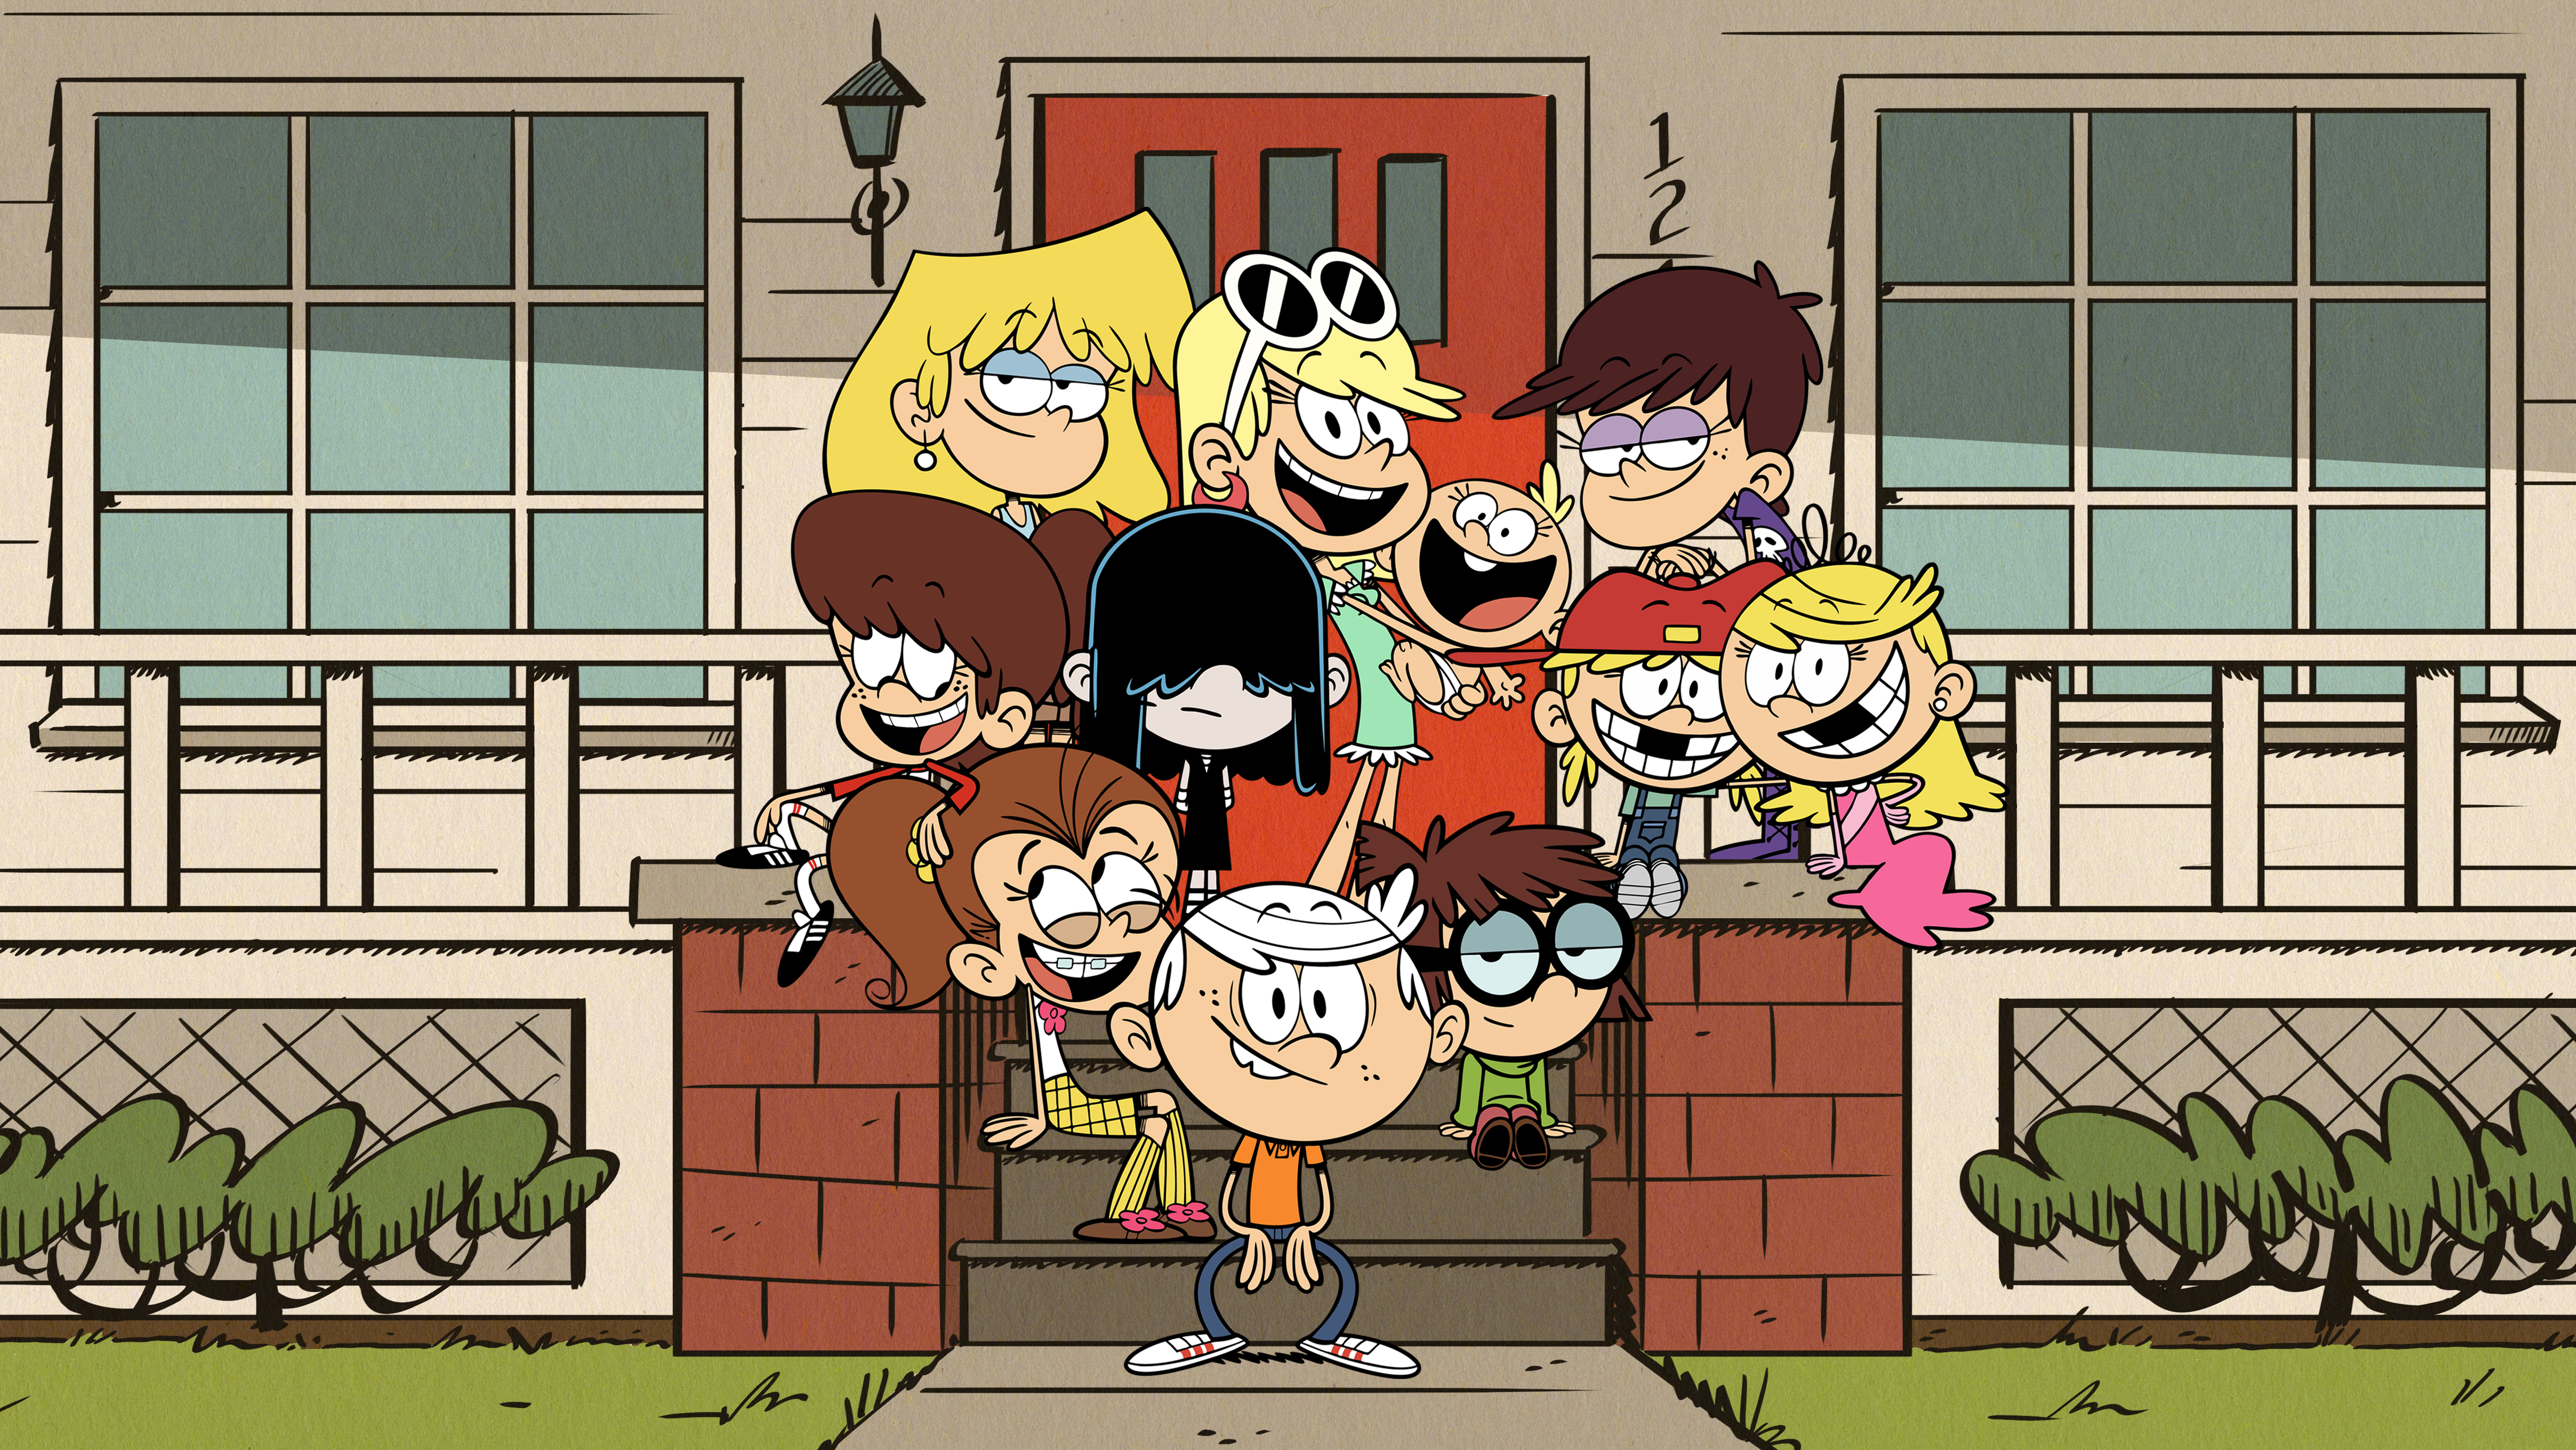 10 SISTERS? NO PROBLEM! Nickelodeon's New Original Animated Comedy Series,  The Loud House, Opens Its Doors, Monday, May 2, at 5:. (ET/PT) |  Business Wire